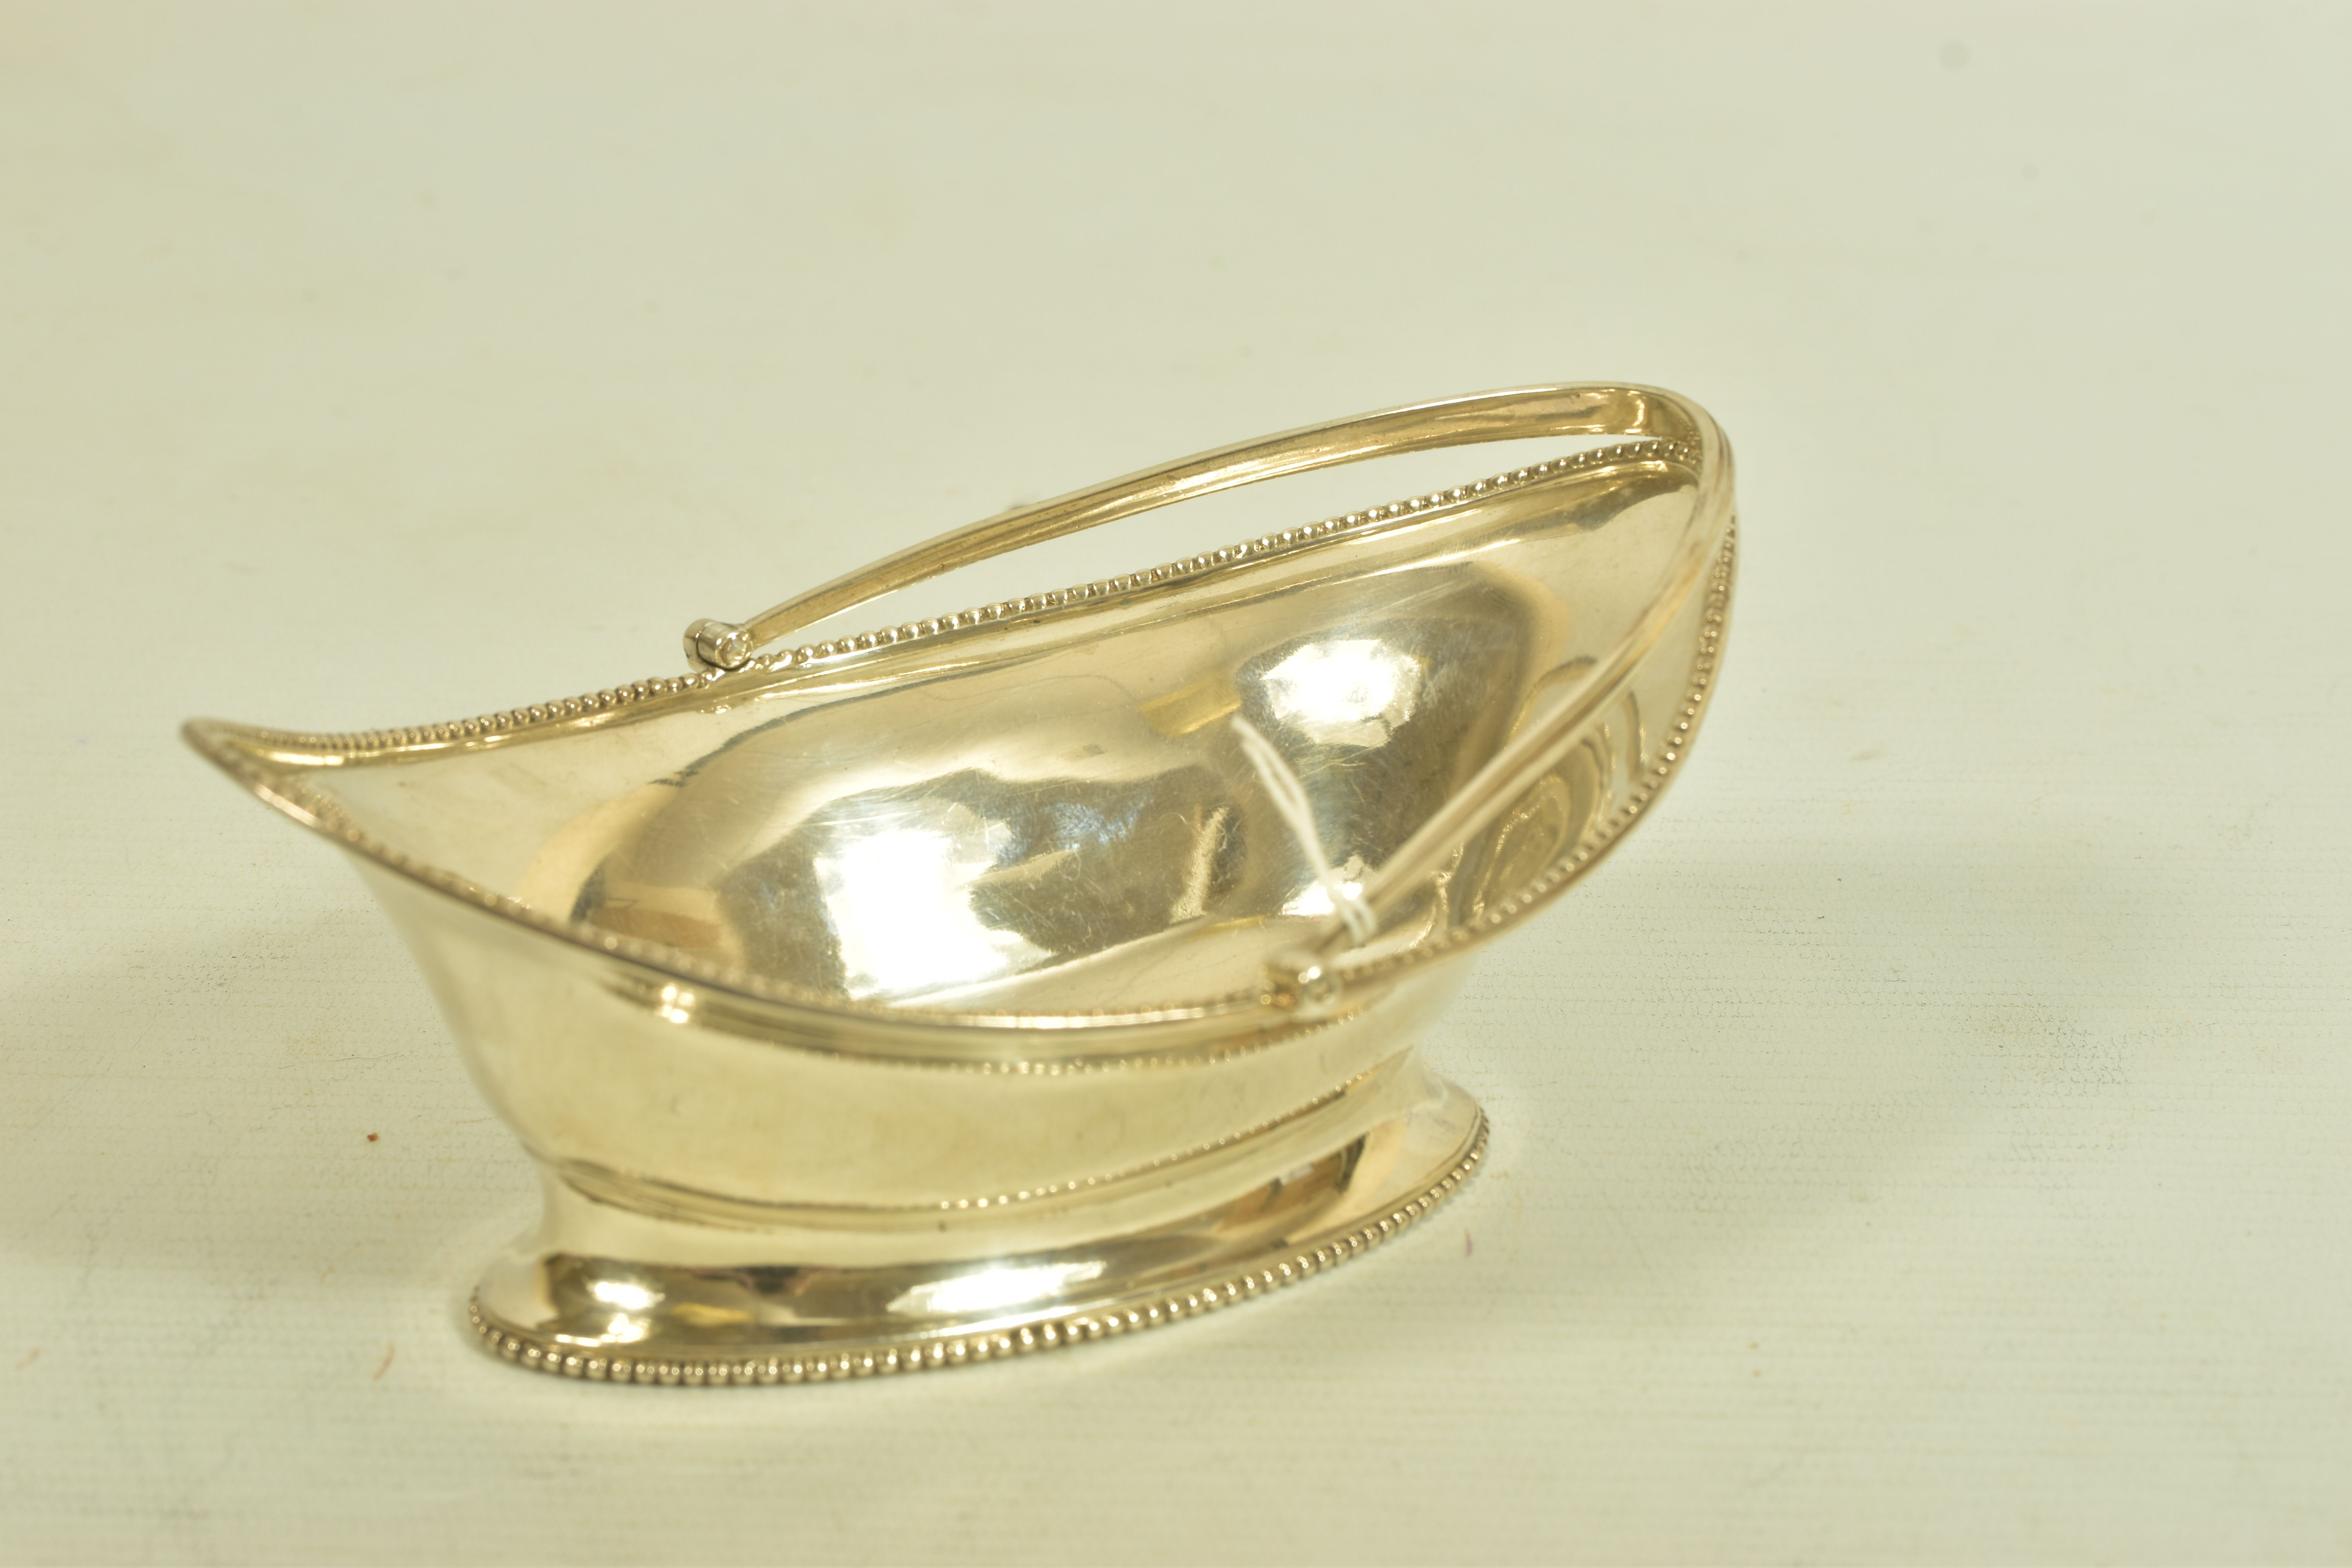 A GEORGIAN SILVER BASKET, of oval outline with plain polished beaded border and grooved handle, - Image 4 of 4